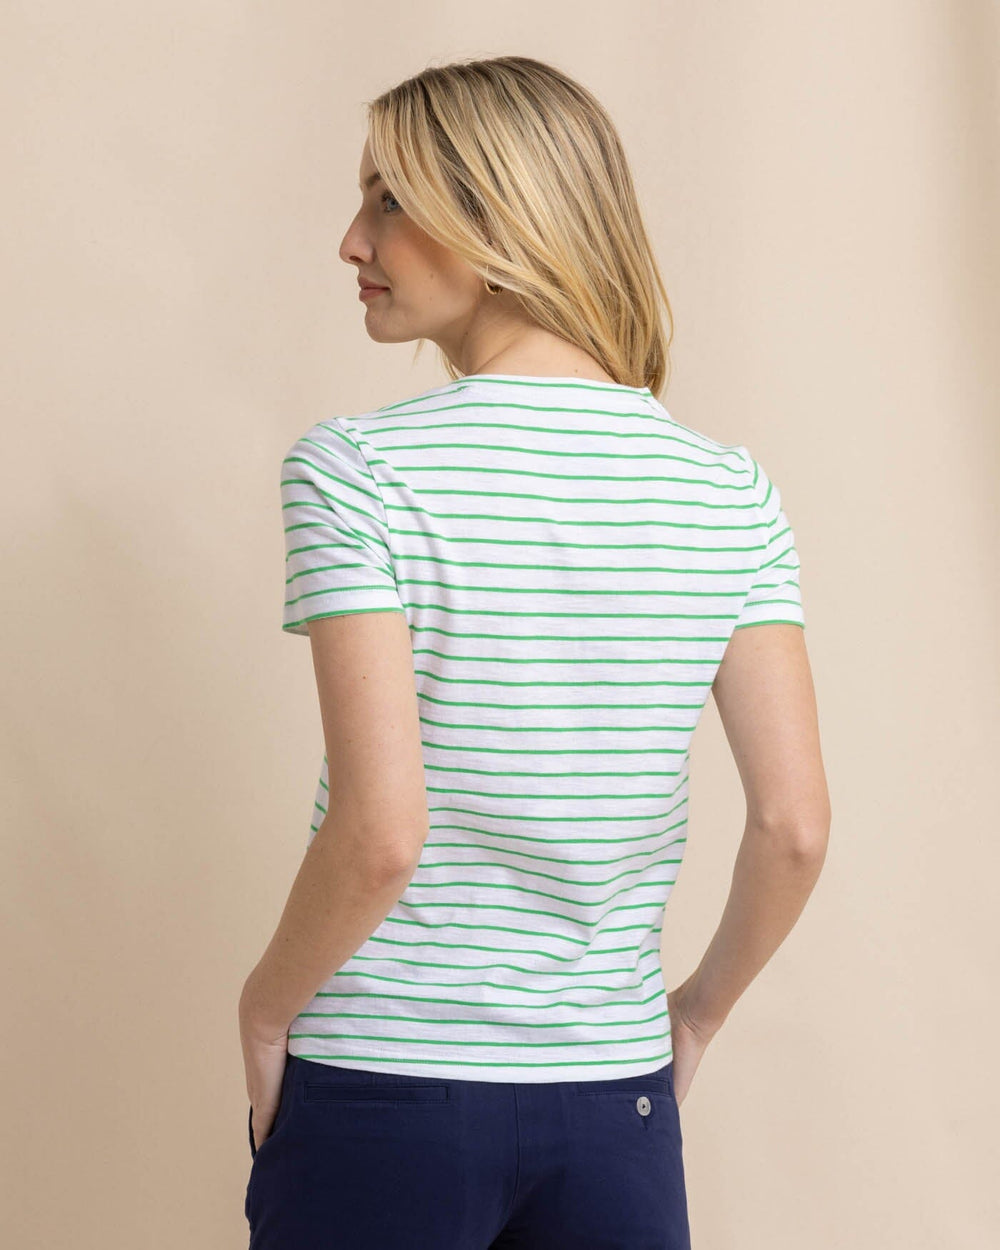 The back view of the Southern Tide Sun Farer Stripe Crew Neck T-Shirt by Southern Tide - Lawn Green